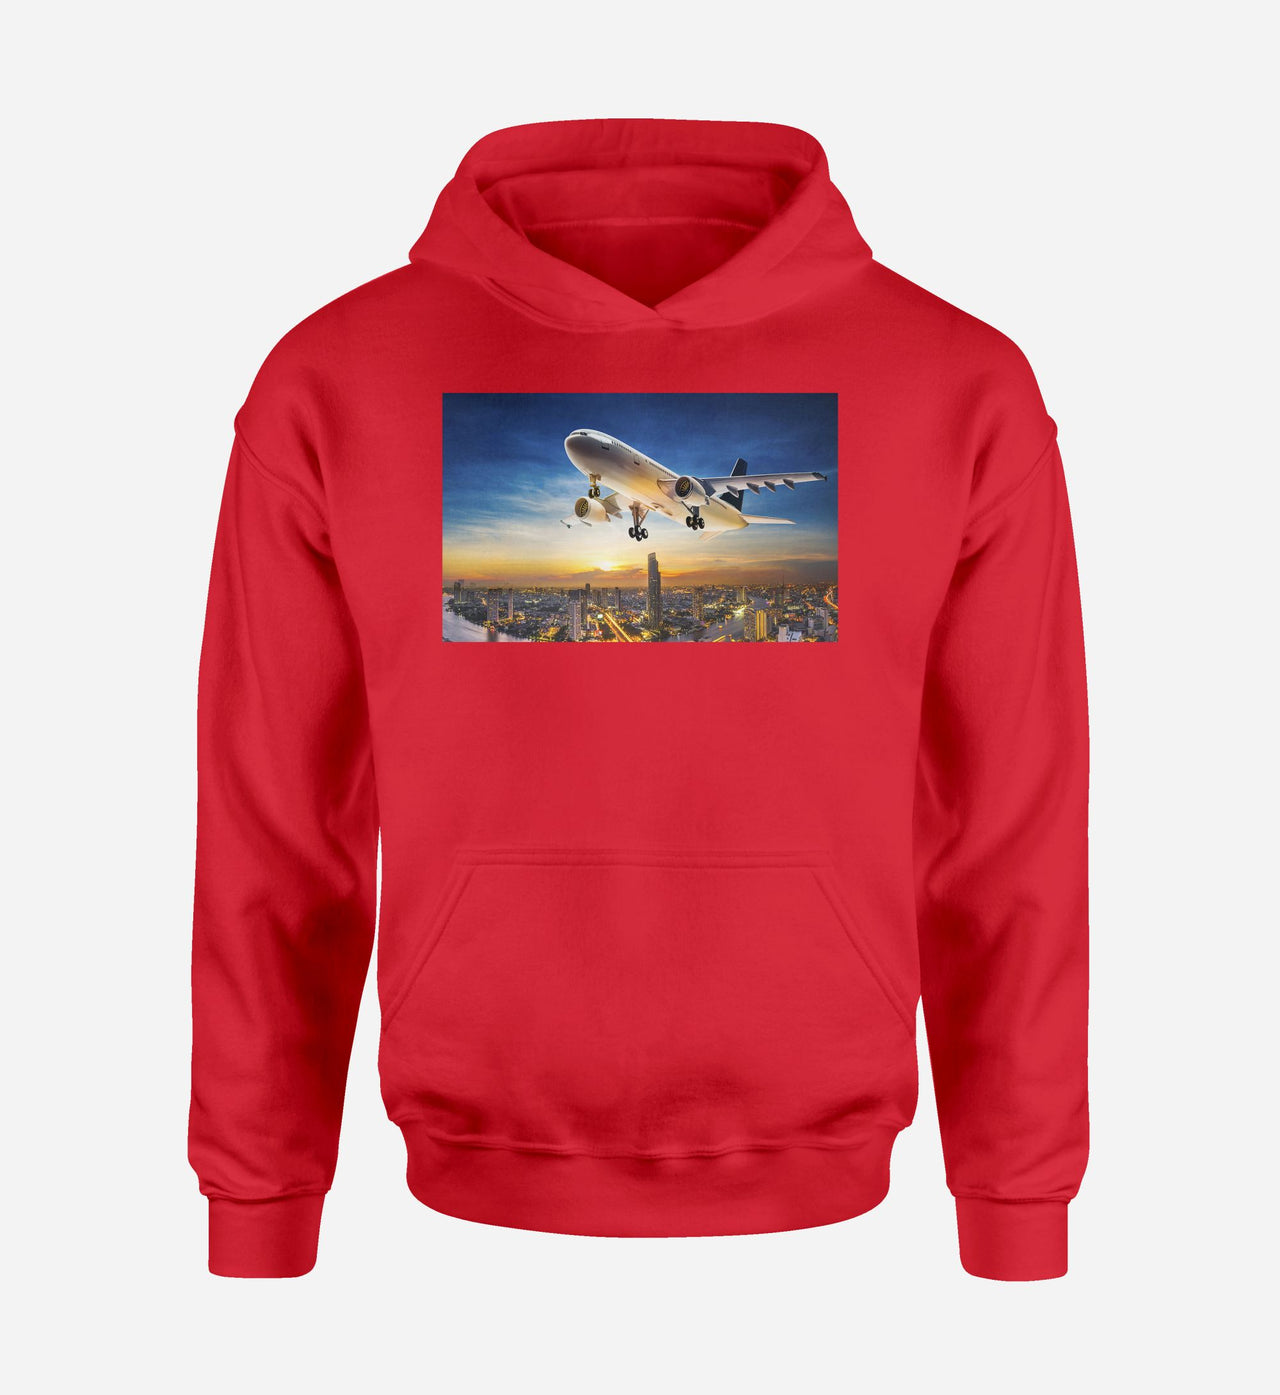 Super Aircraft over City at Sunset Designed Hoodies